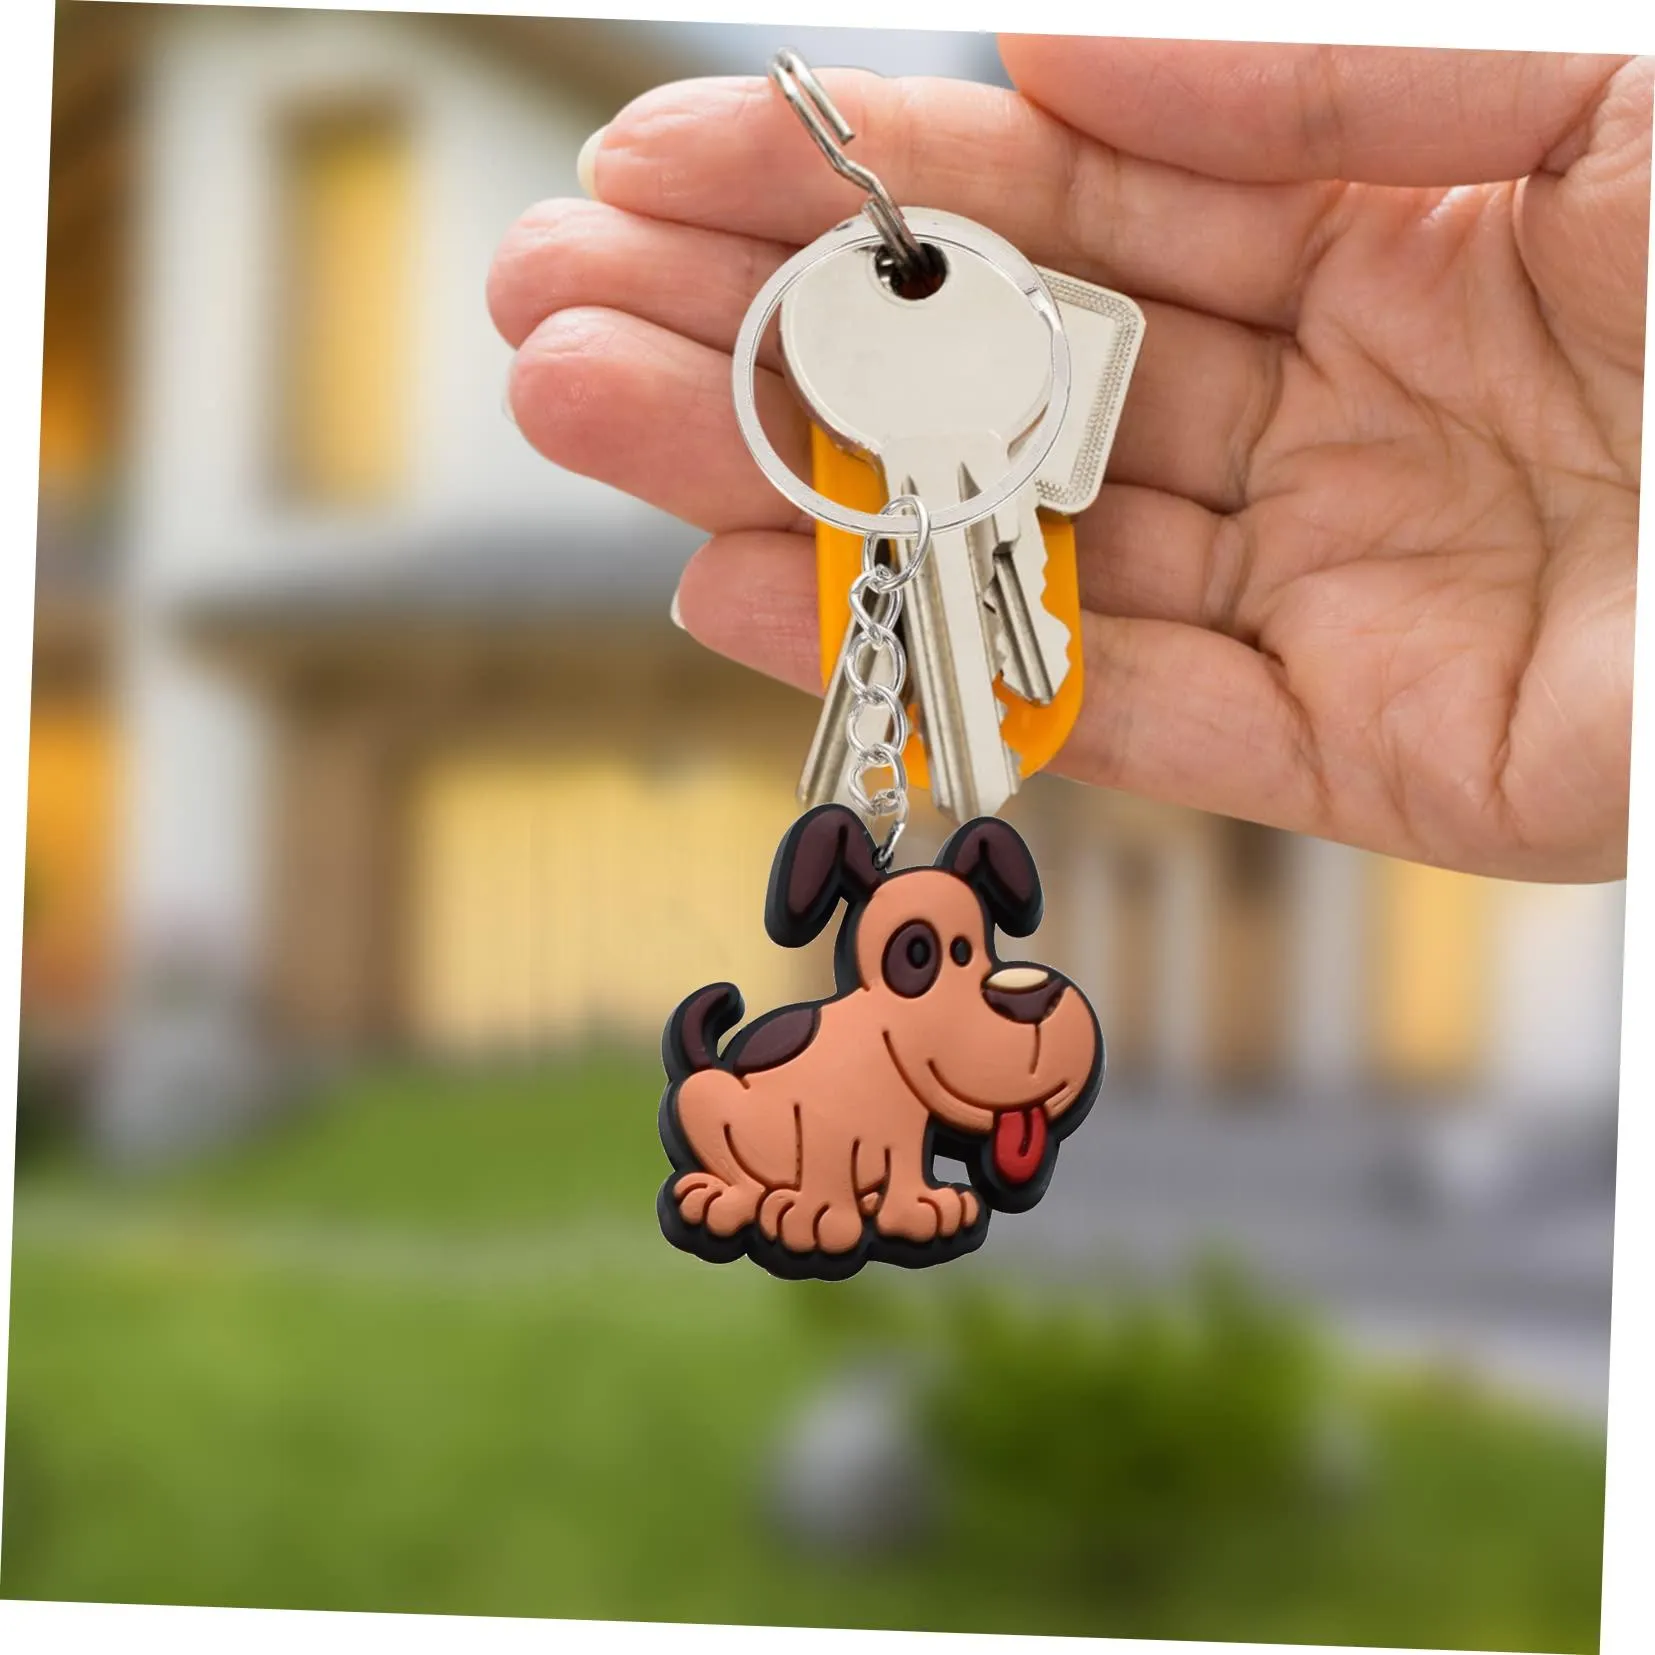 new dog 2 keychain key chain ring christmas gift for fans keychains girls rings keyring suitable schoolbag backpack men car bag